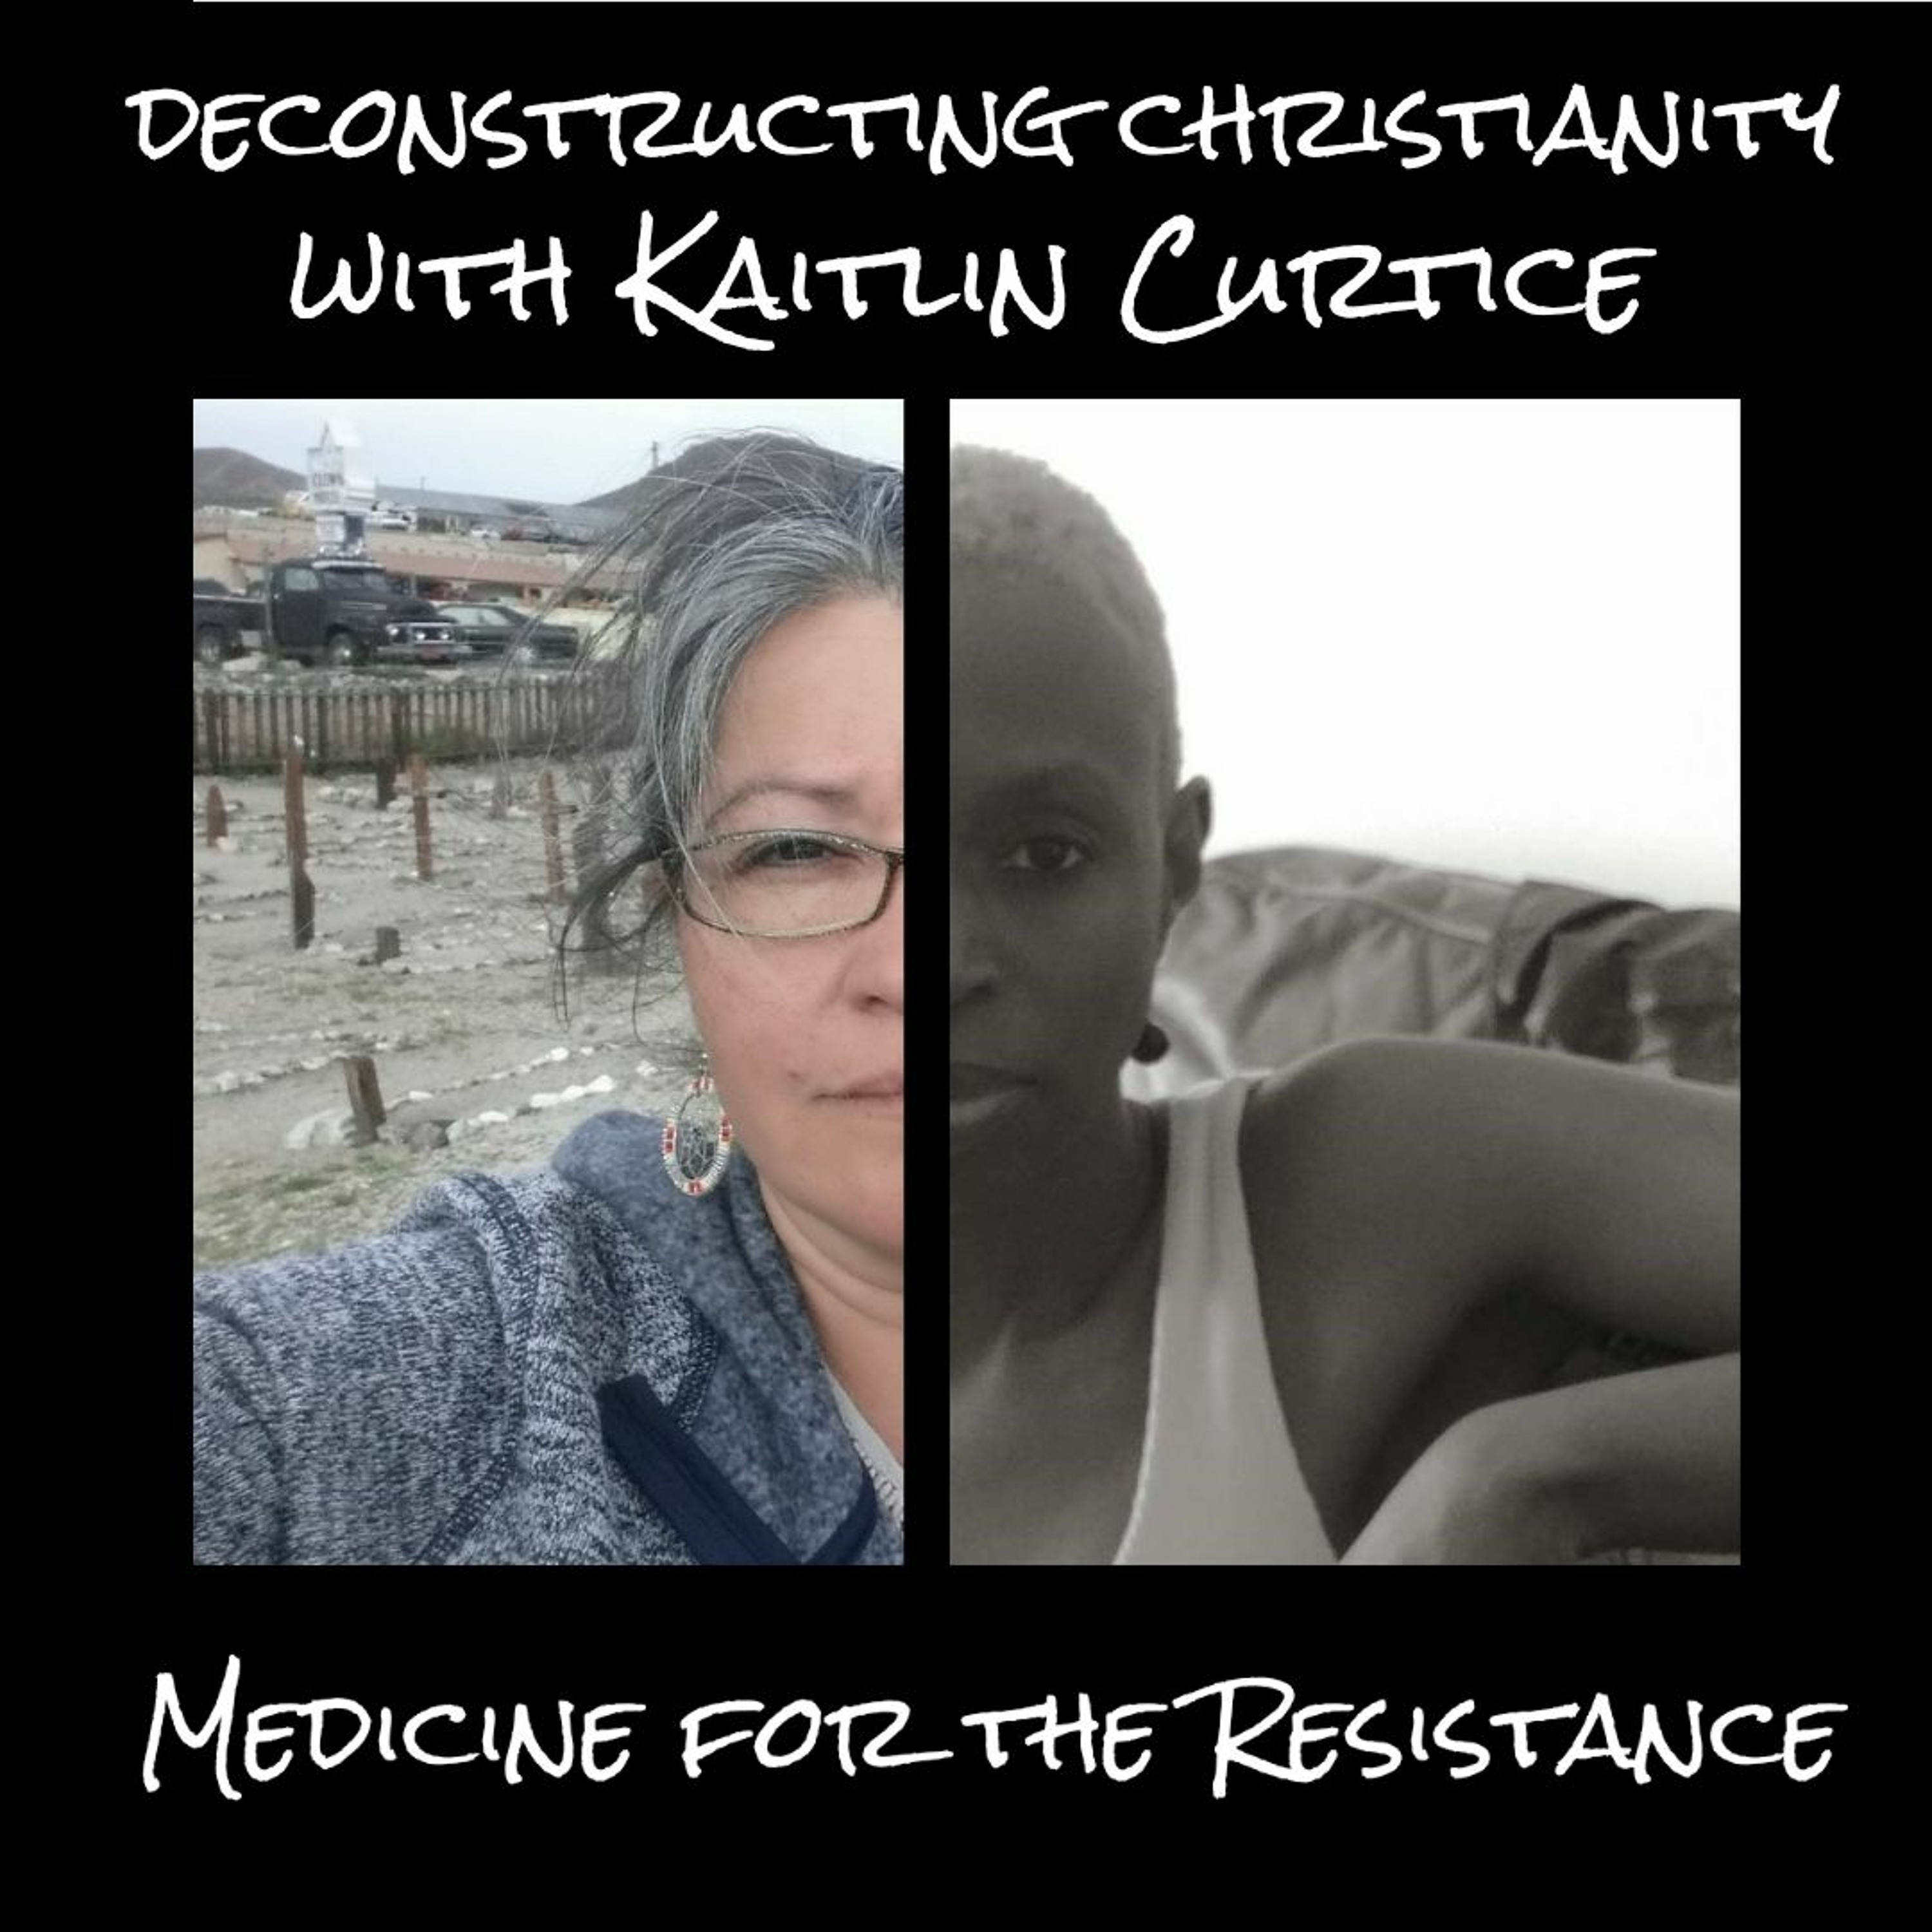 Rethinking Christianity with Kaitlin Curtice.  First of two conversations.